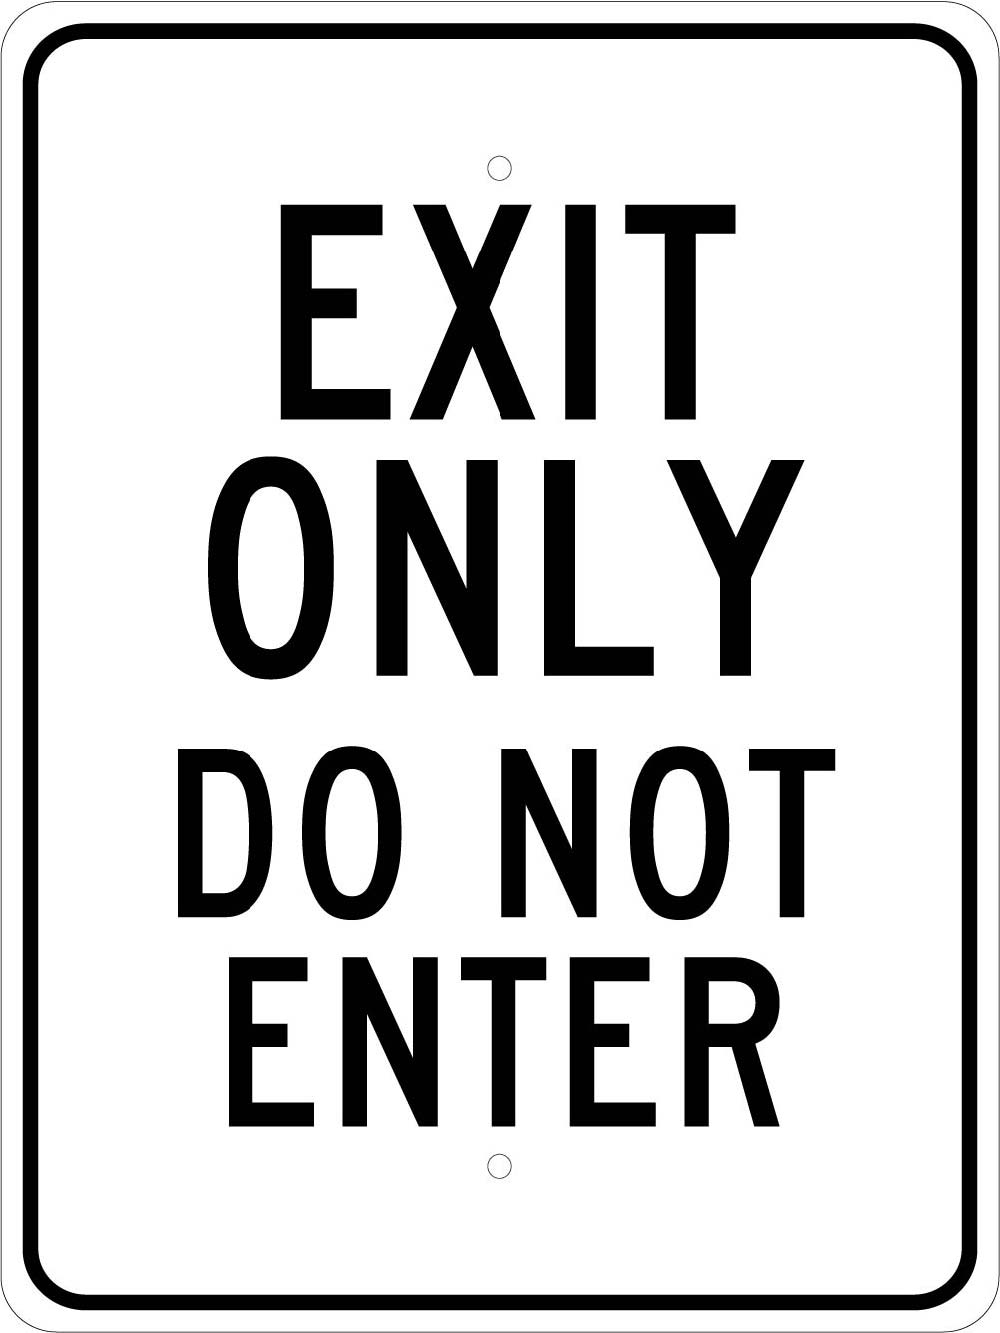 Exit Only Do Not Enter Sign-eSafety Supplies, Inc